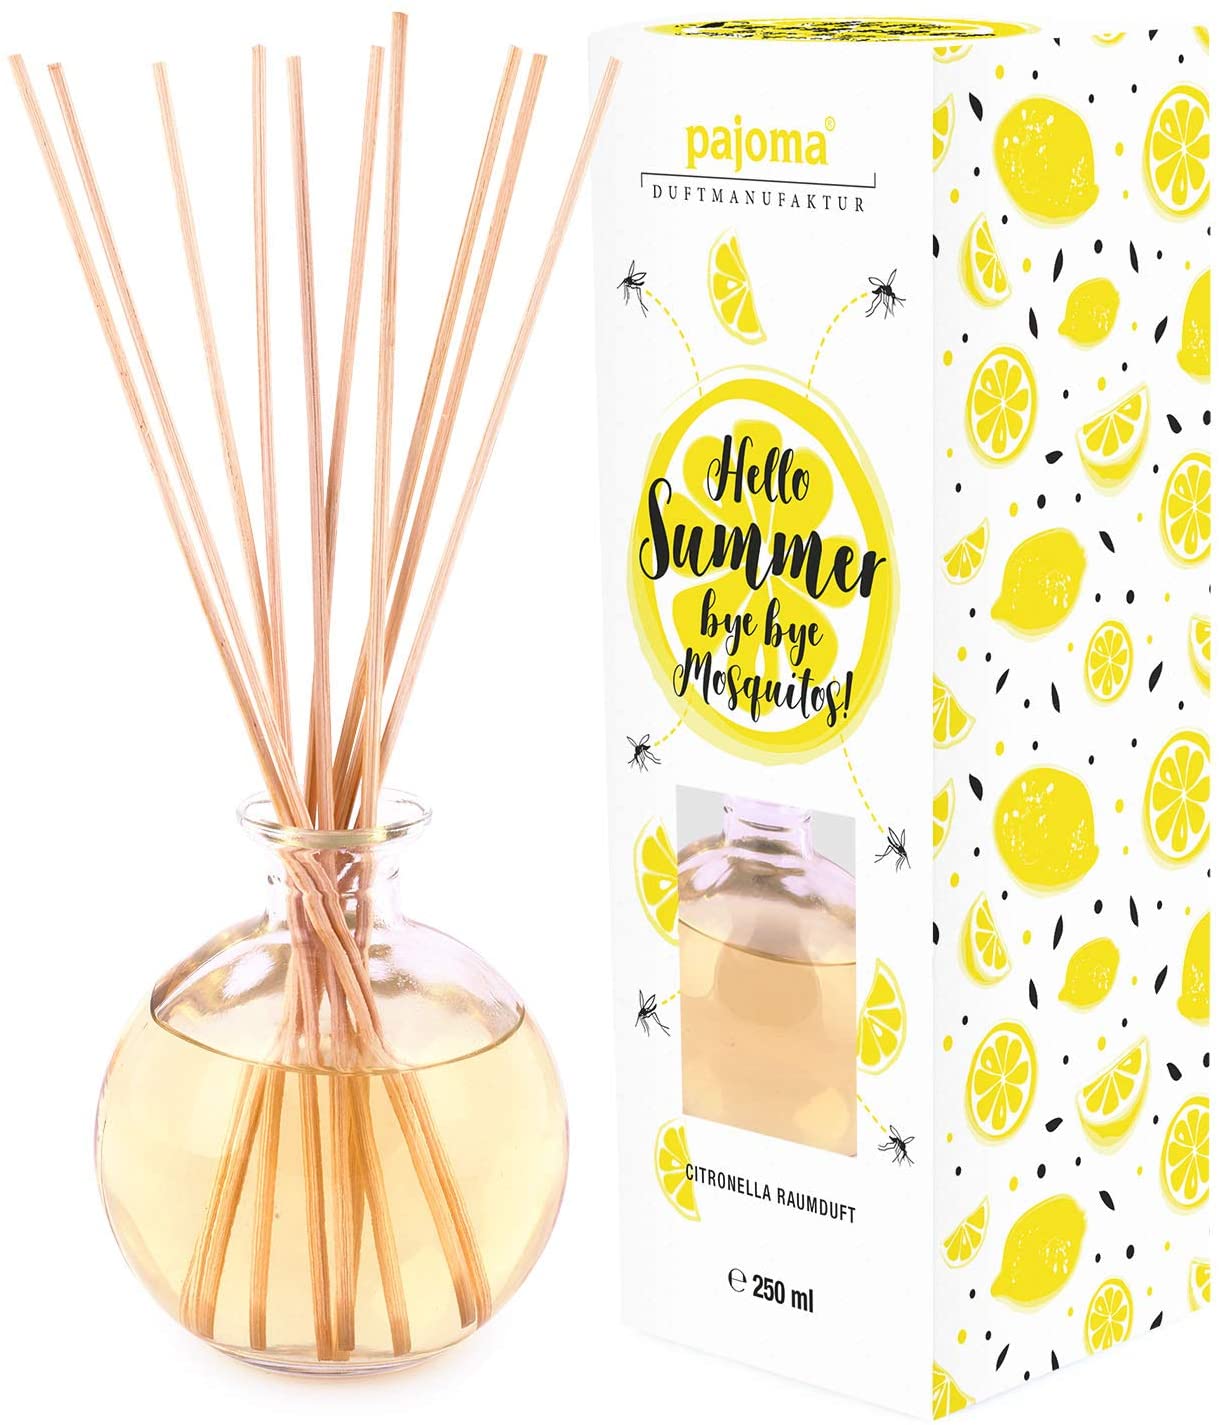 Pajoma Room Fragrance Citronella 250 Ml In Gift Packaging